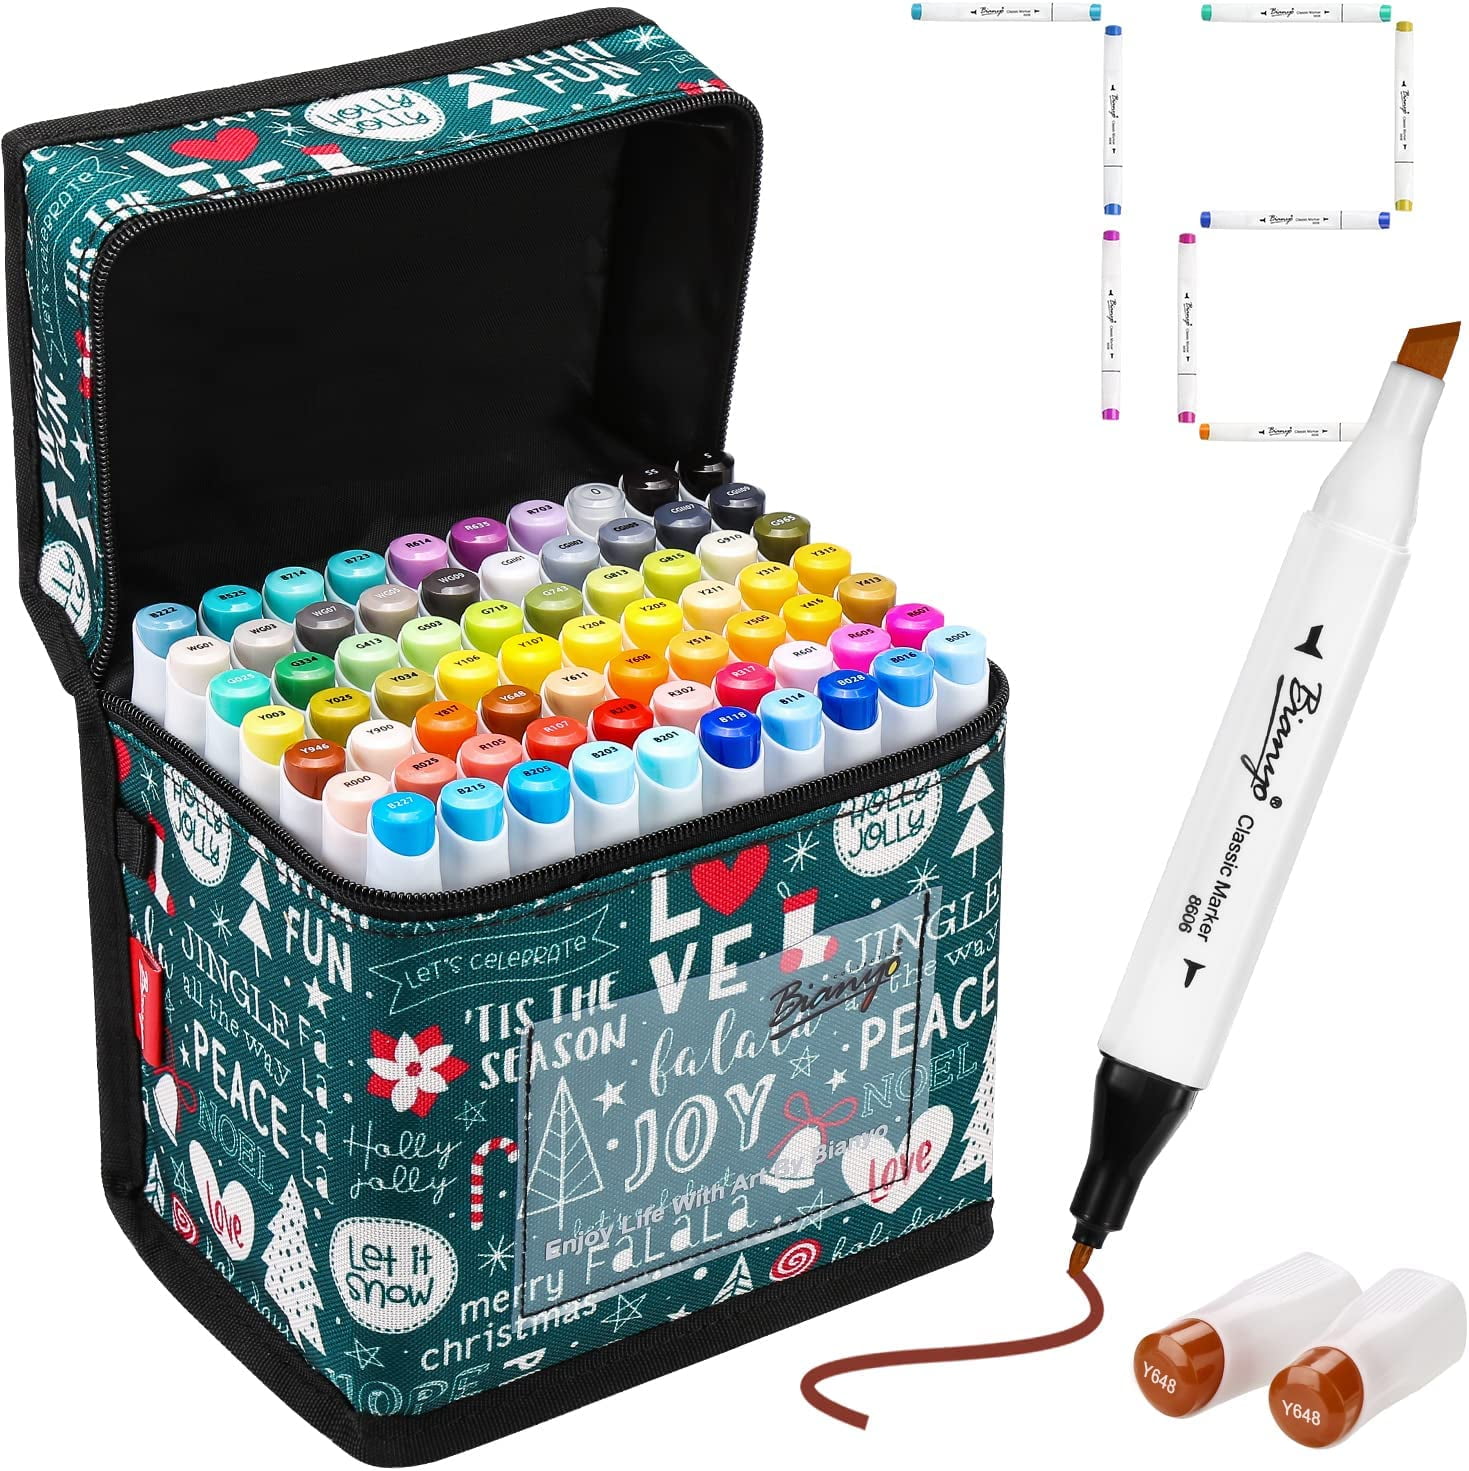 Bianyo 36B Alcohol Markers Set, 36 Primary Colors Alcohol-Based Dual Tip  Bullet & Chisel Art Markers Set with Premium Black Bag for Coloring,  Drawing